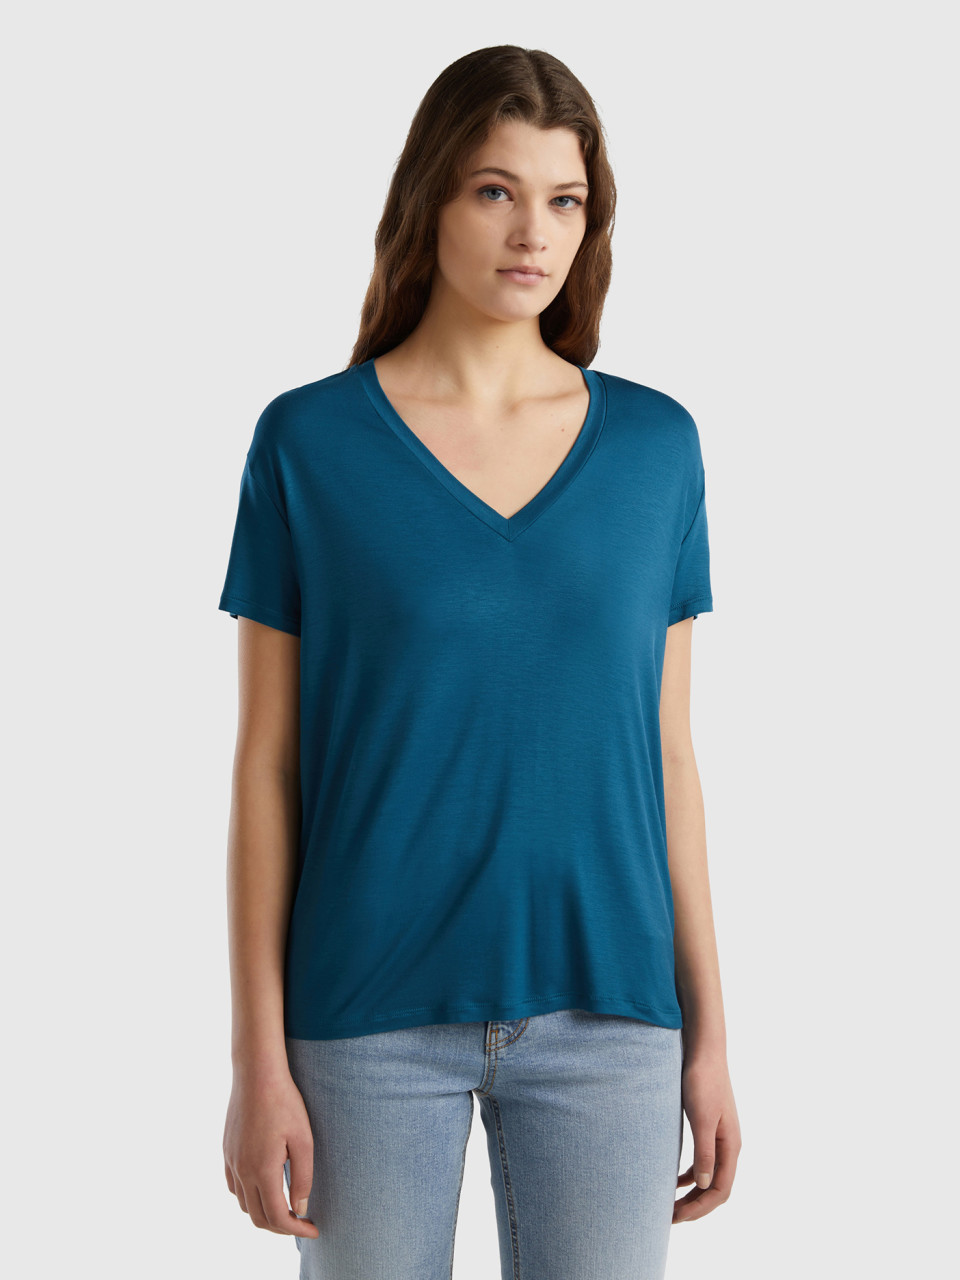 Benetton, T-shirt In Sustainable Stretch Viscose, Teal, Women